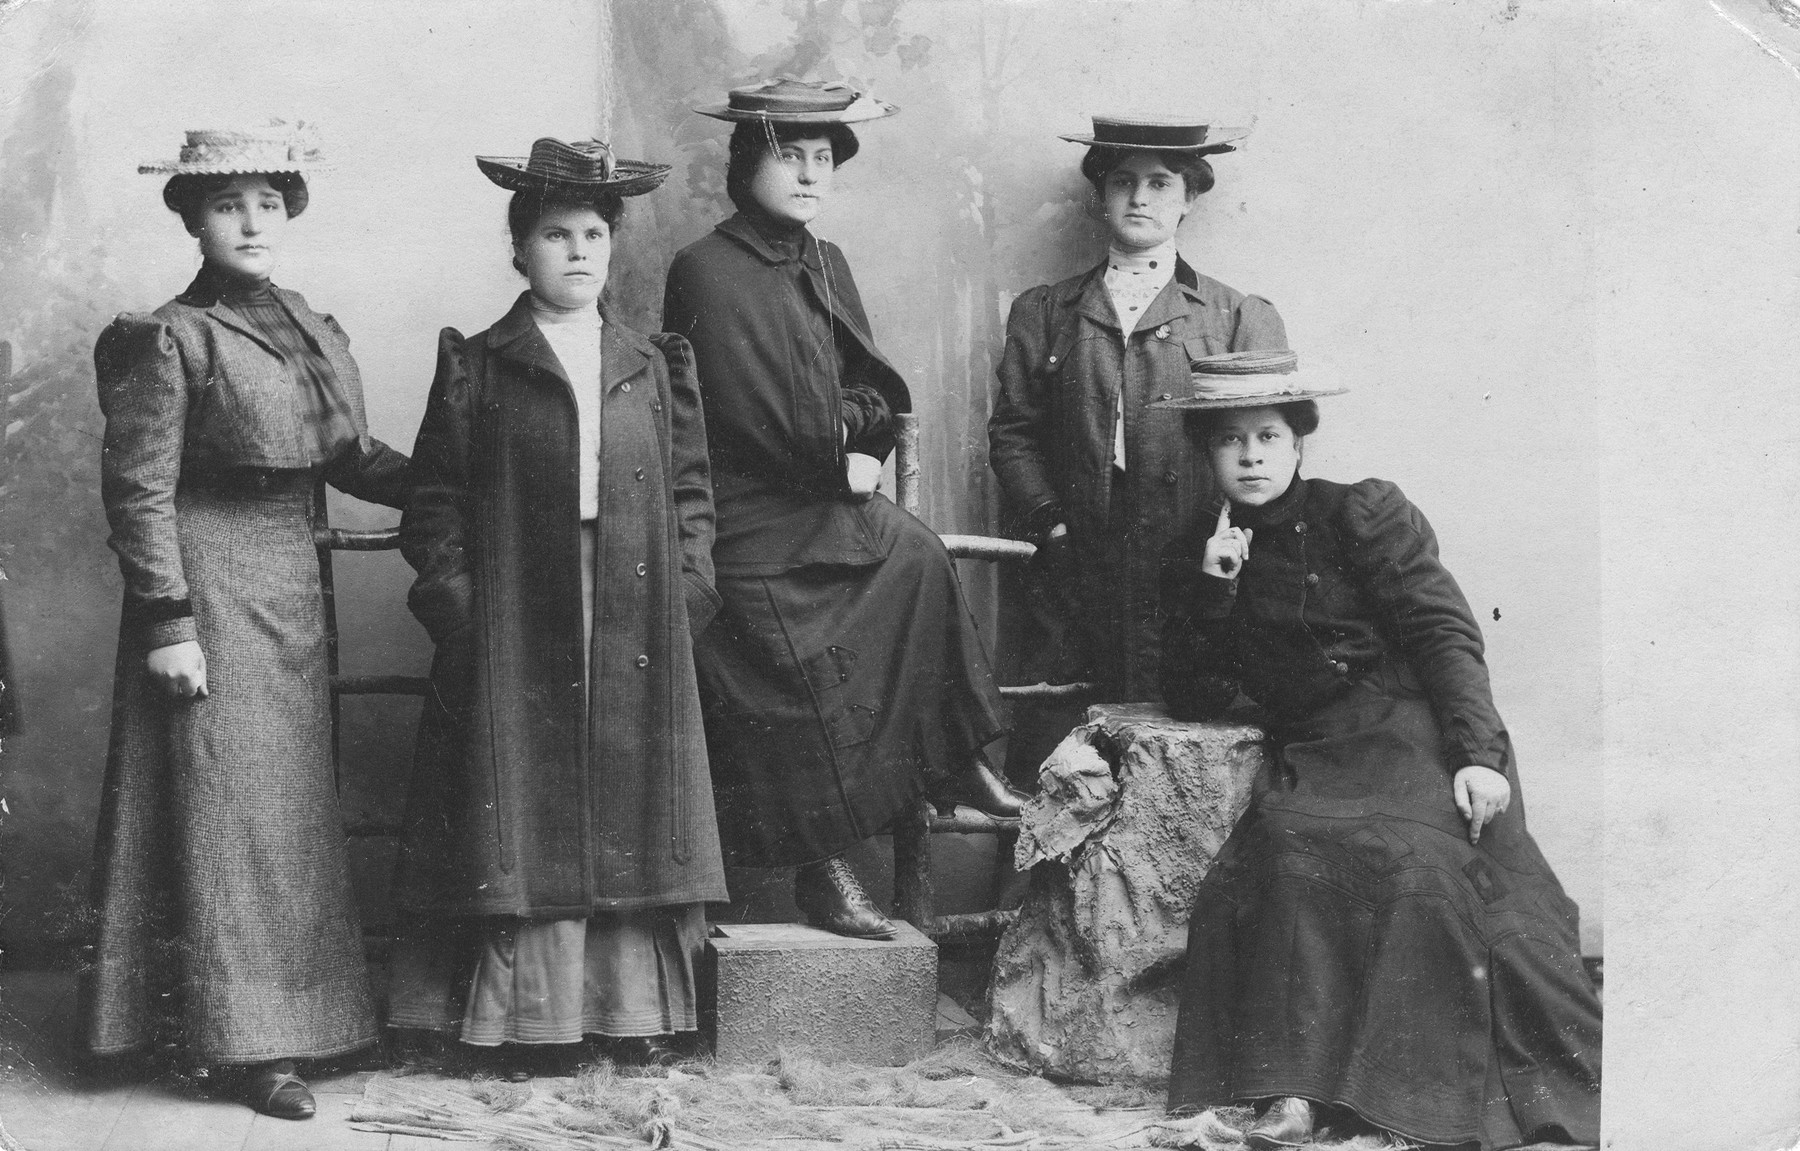 Studio portrait taken in the early 1900s of five young Jewish women.